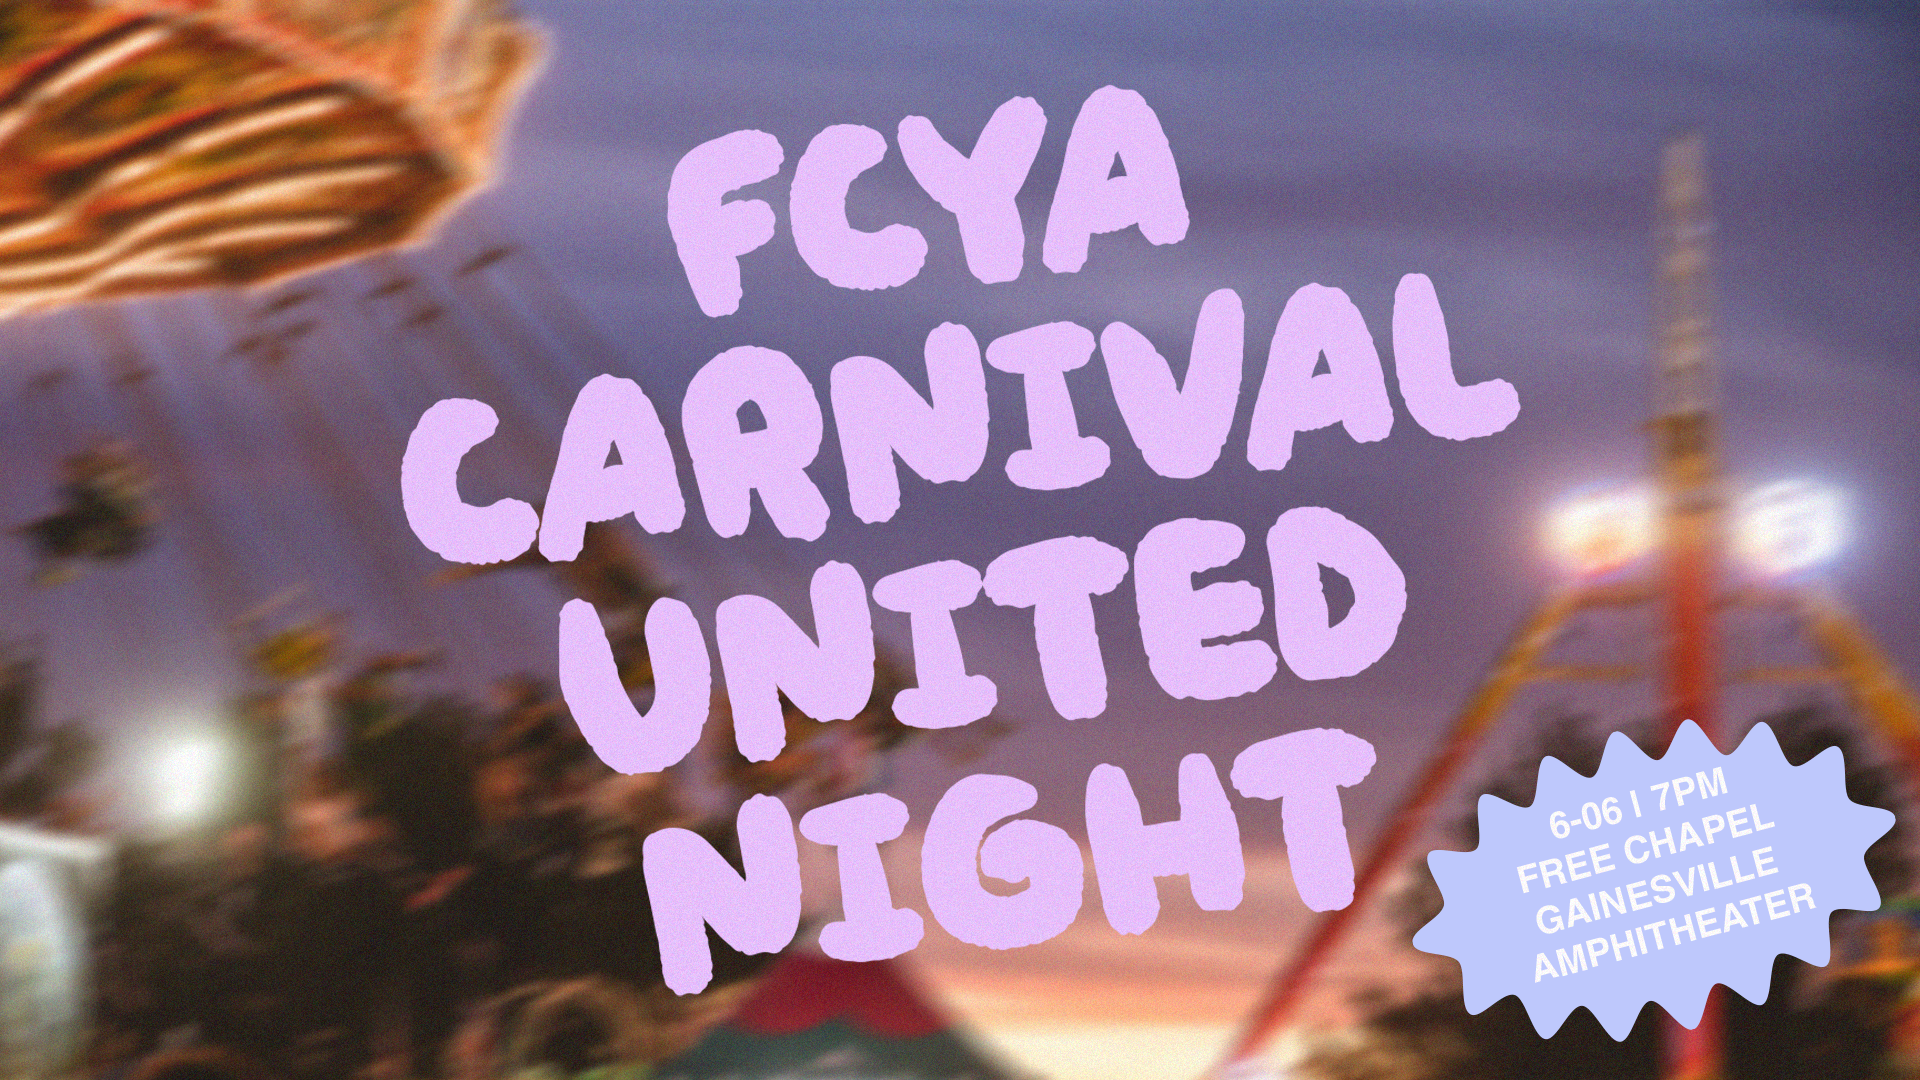 FCYA Carnival x United Night at the Gainesville campus